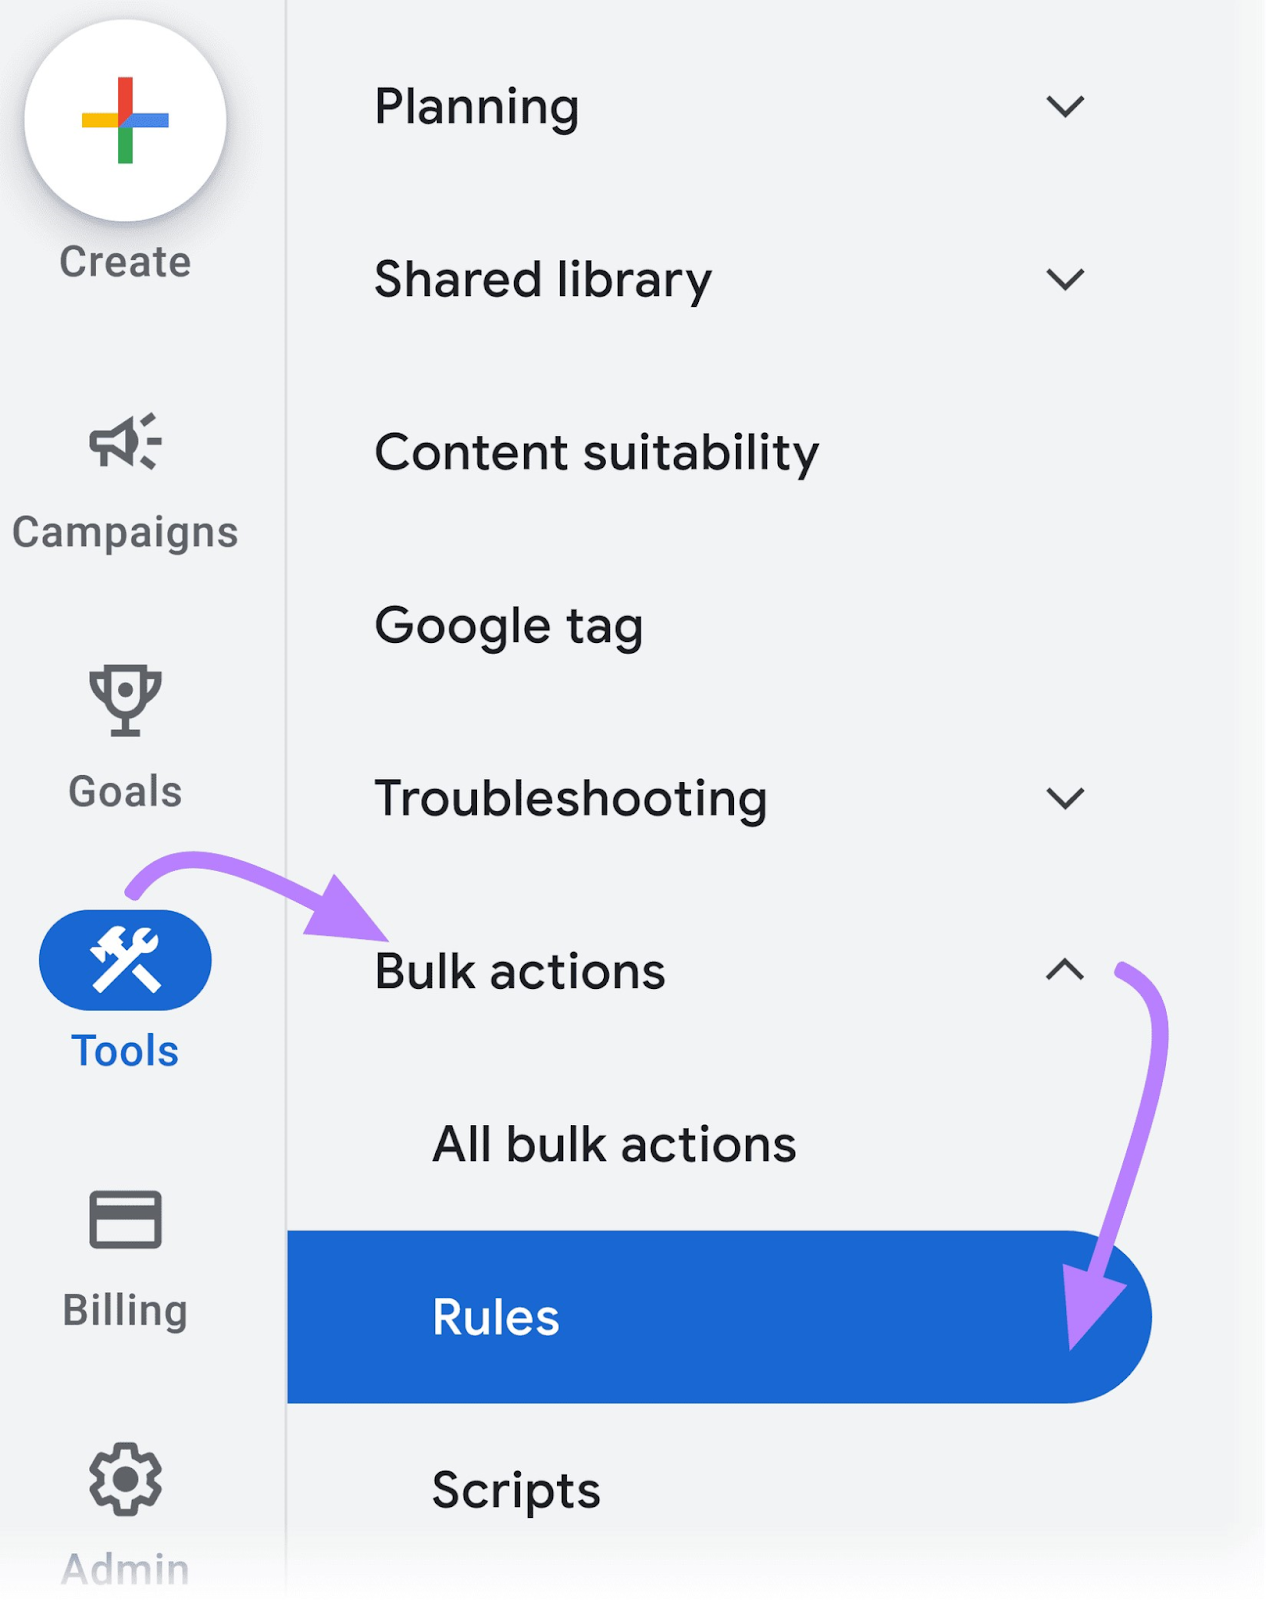 "Rules" selected from the "Bulk actions" drop-down menu in Google Ads